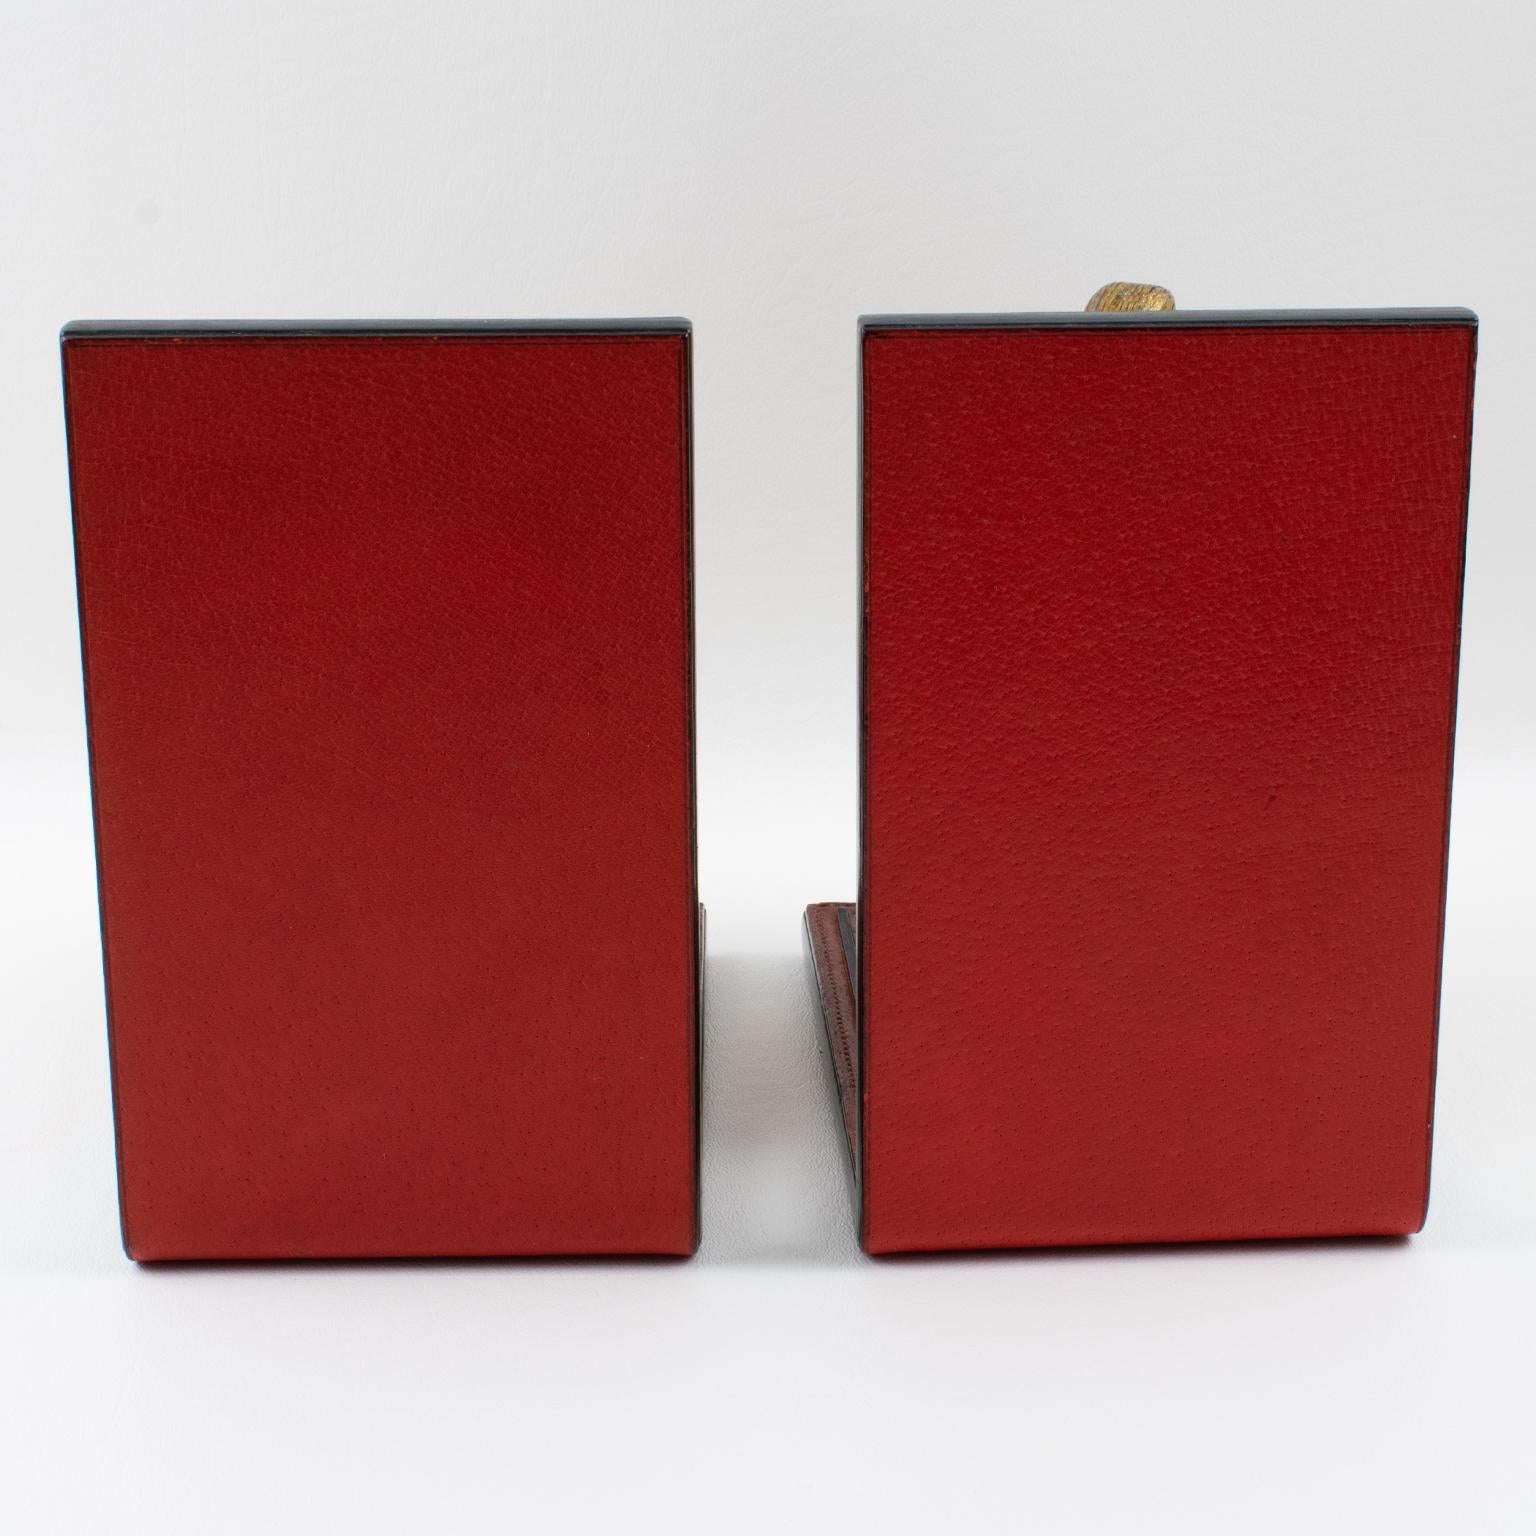 Italian Gucci Italy Hand-Stitched Red Leather Bookends with Gilt Metal Partridges, 1970s For Sale